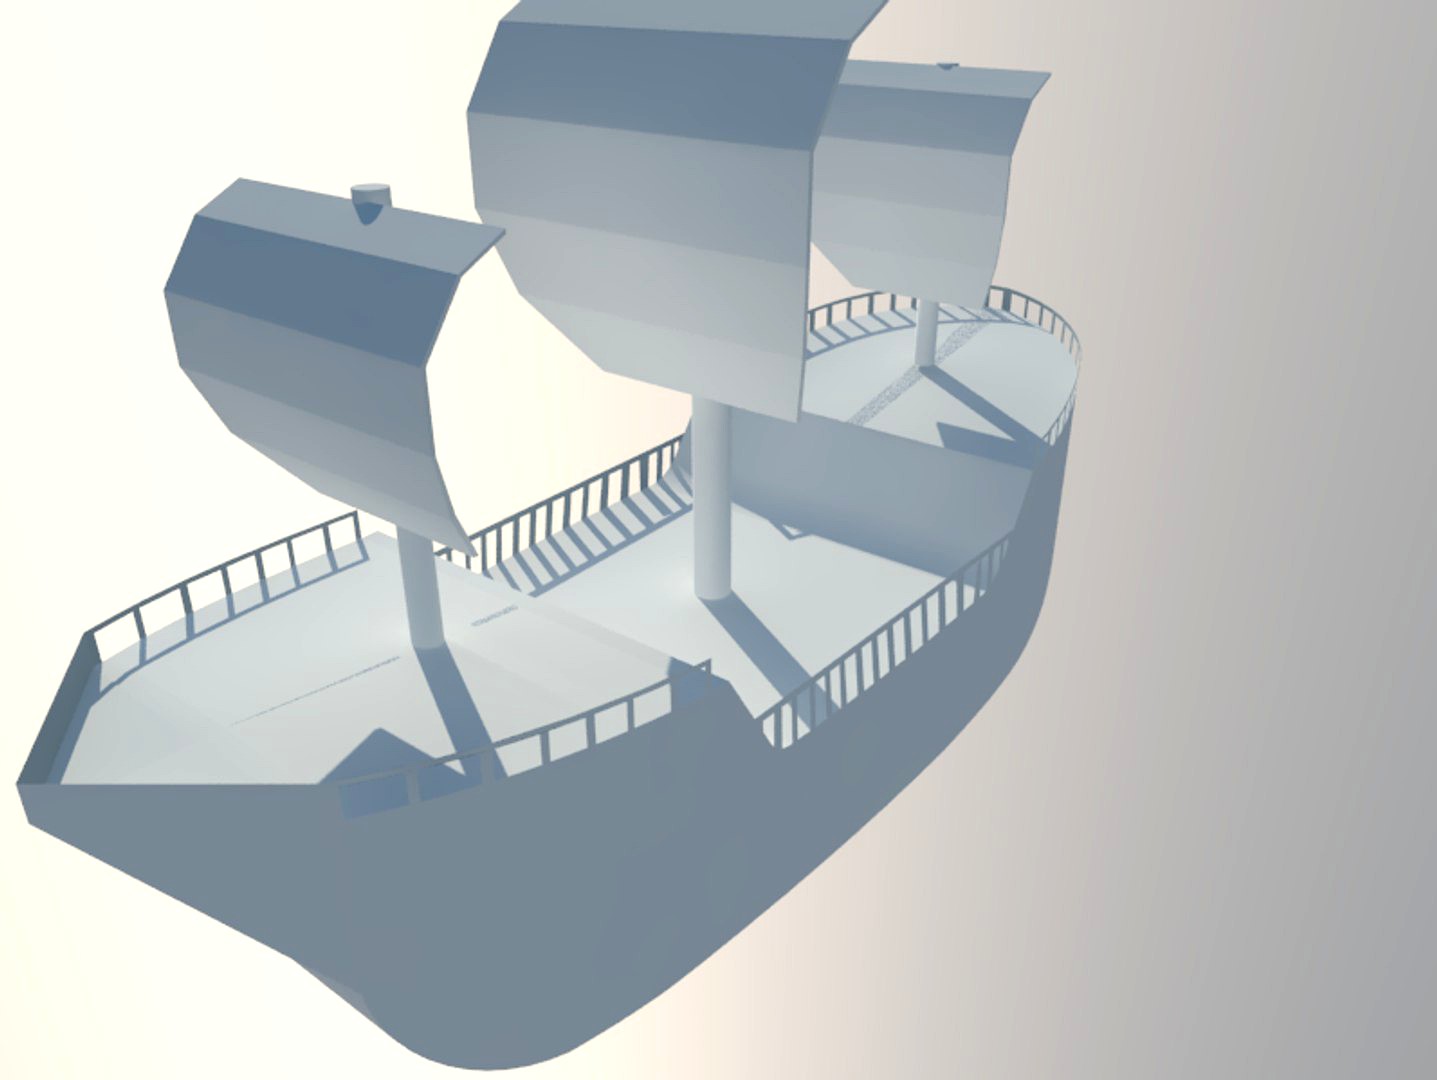 Pirate Ship - Low Poly - No Texture